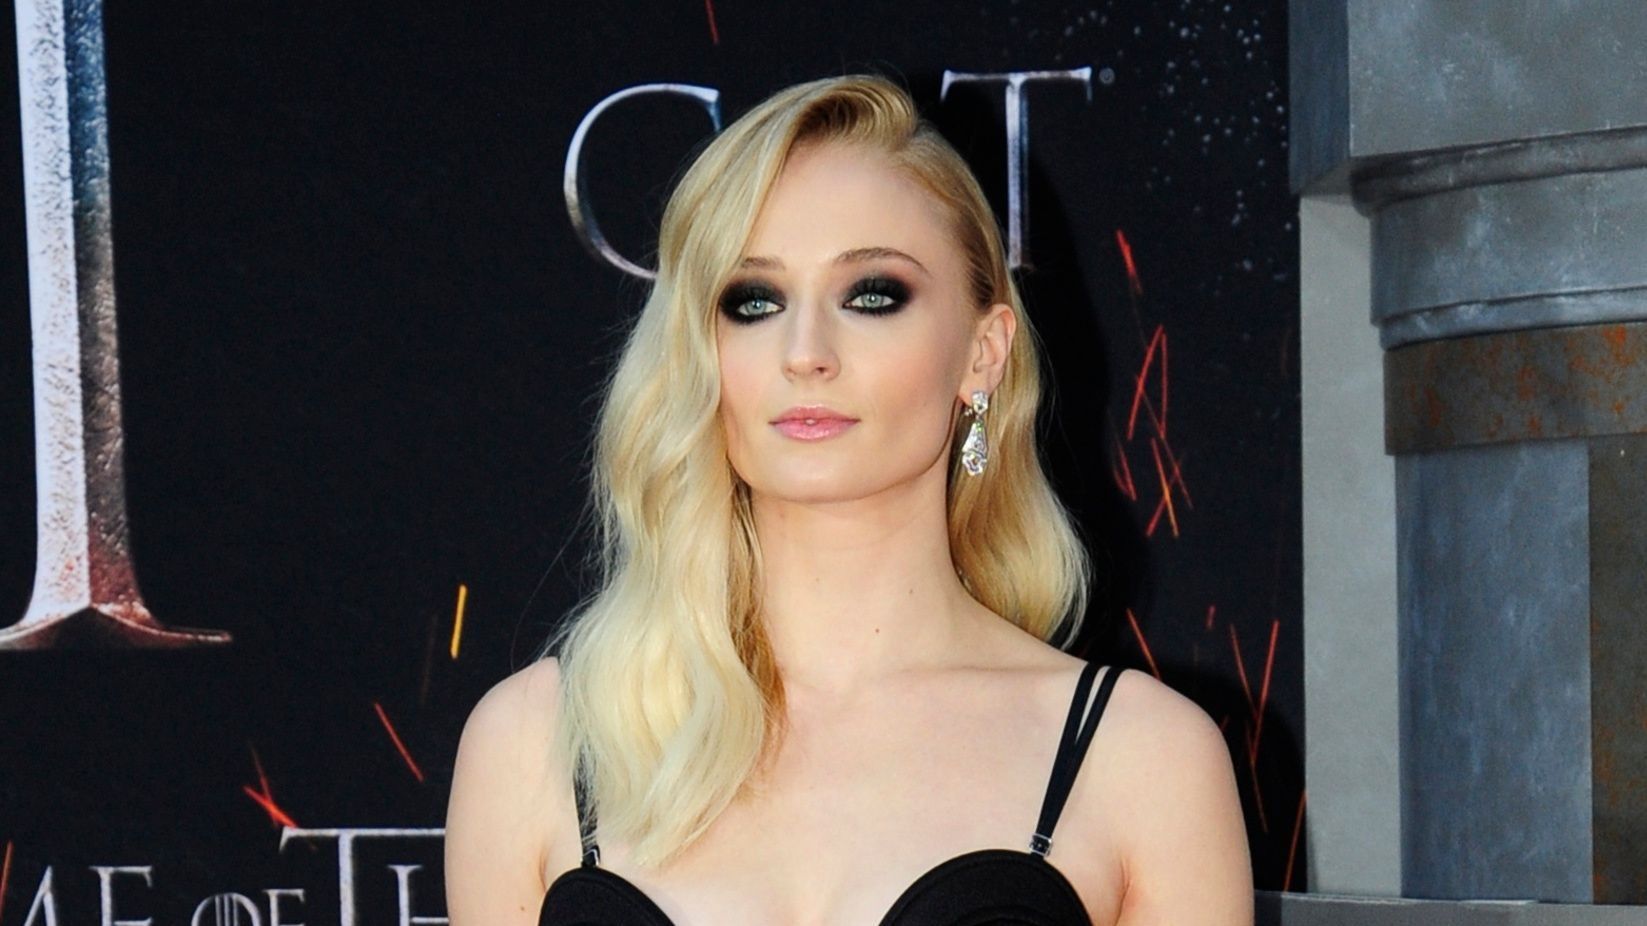 Sophie Turner cuts a chic figure as she discusses Game Of Thrones